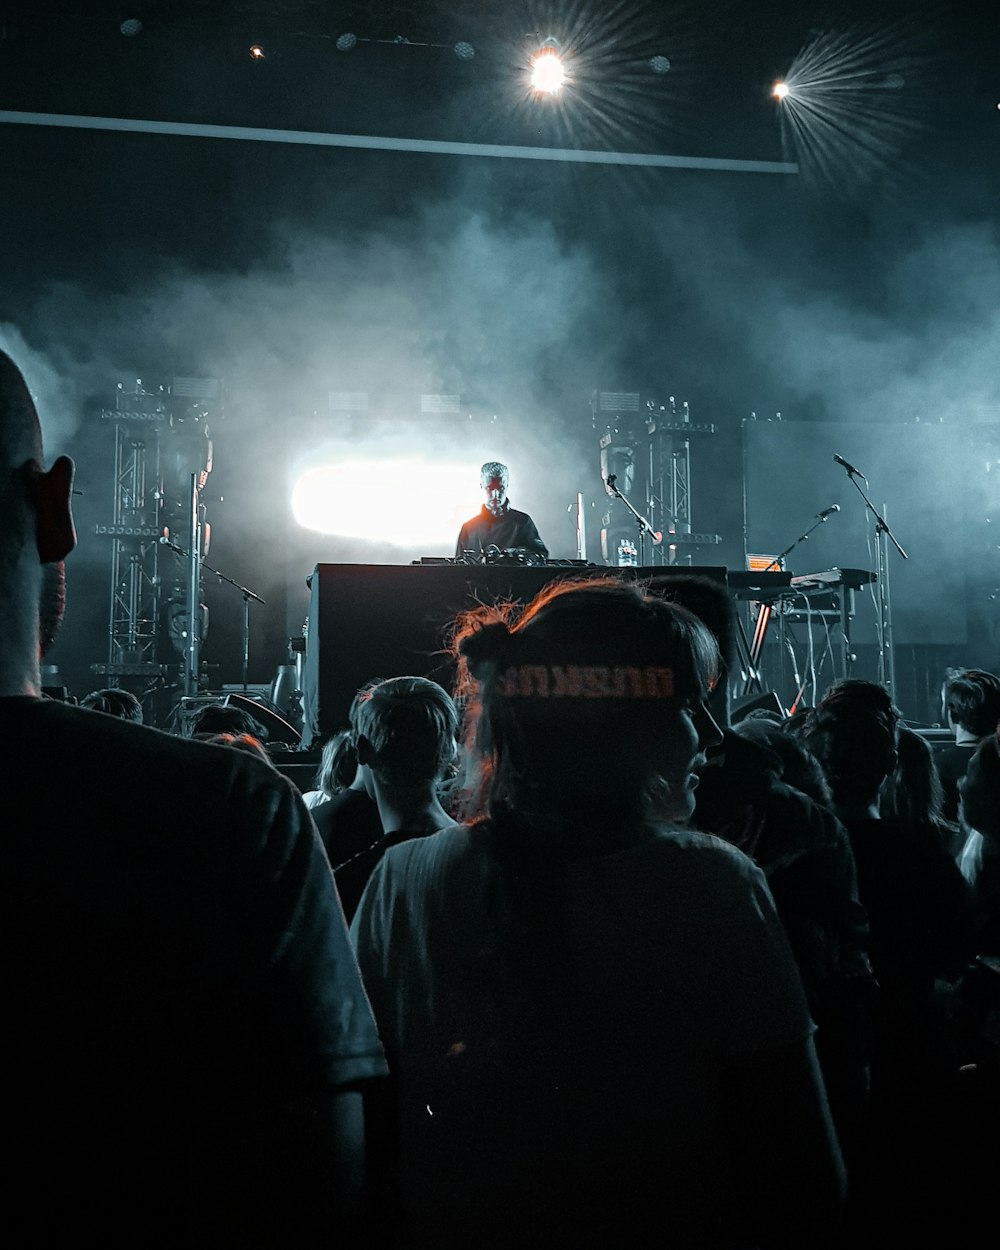 DJ performing on stage in front of people